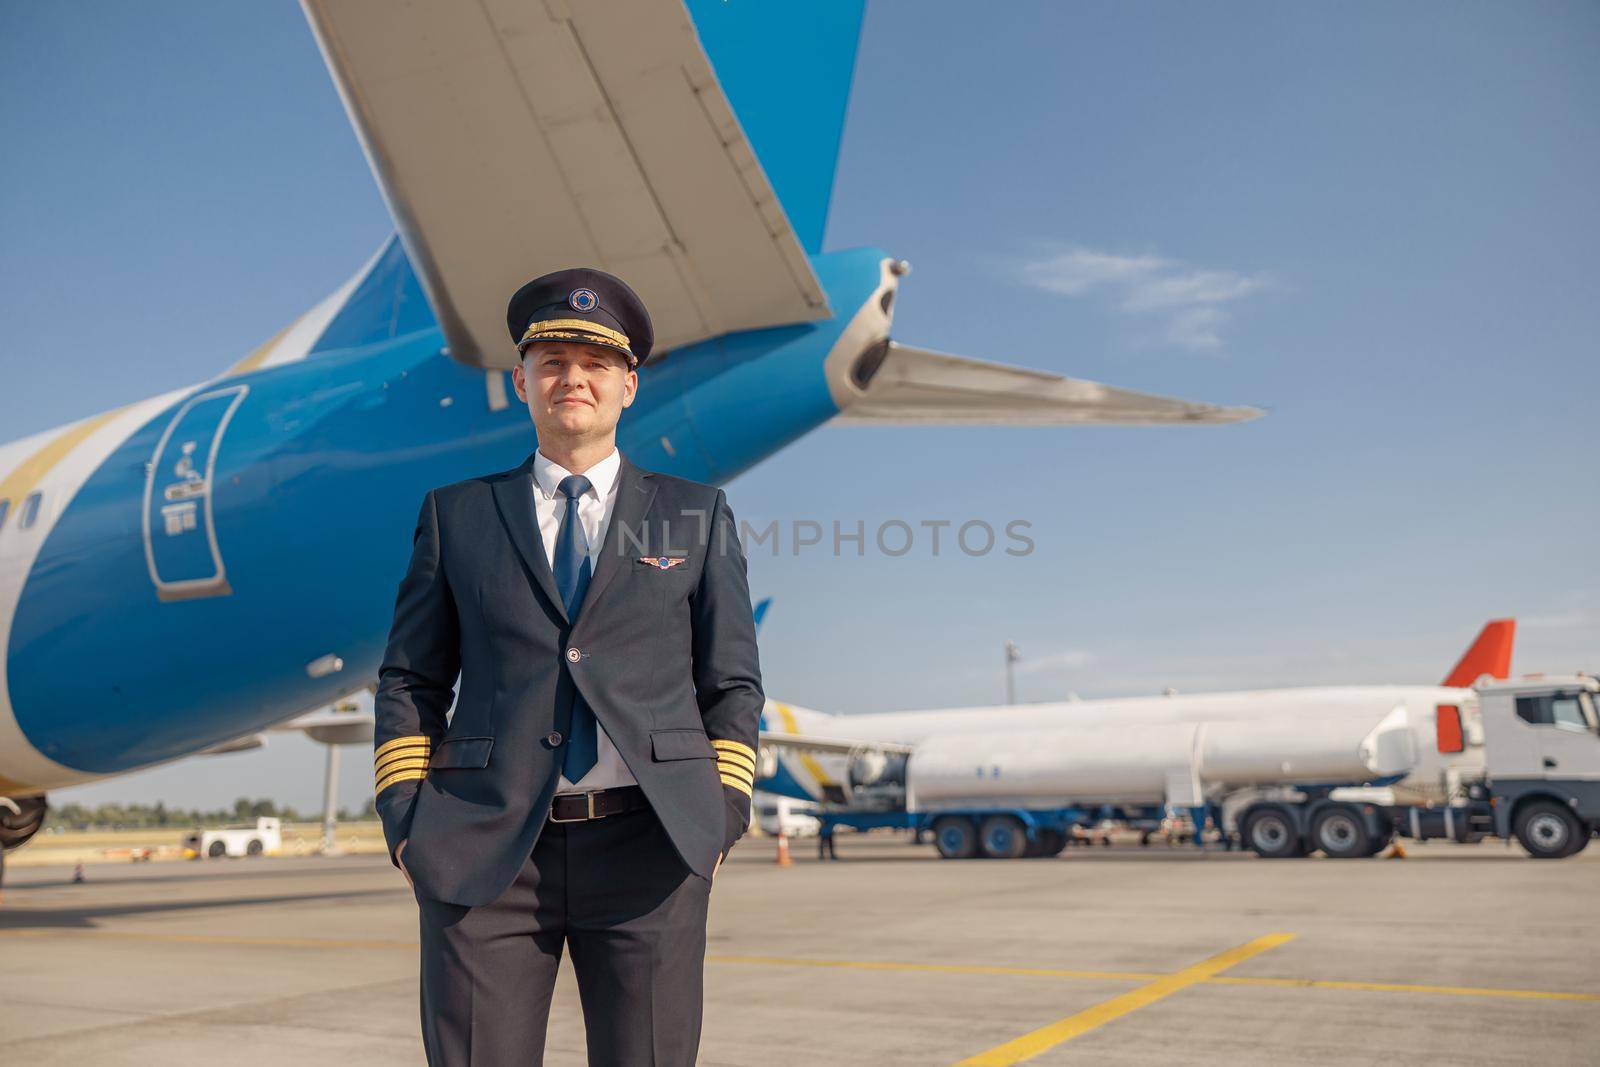 Professional pilot in uniform looking at camera, standing in front of big passenger airplane ready for departure in airport. Aircraft, occupation, transportation concept